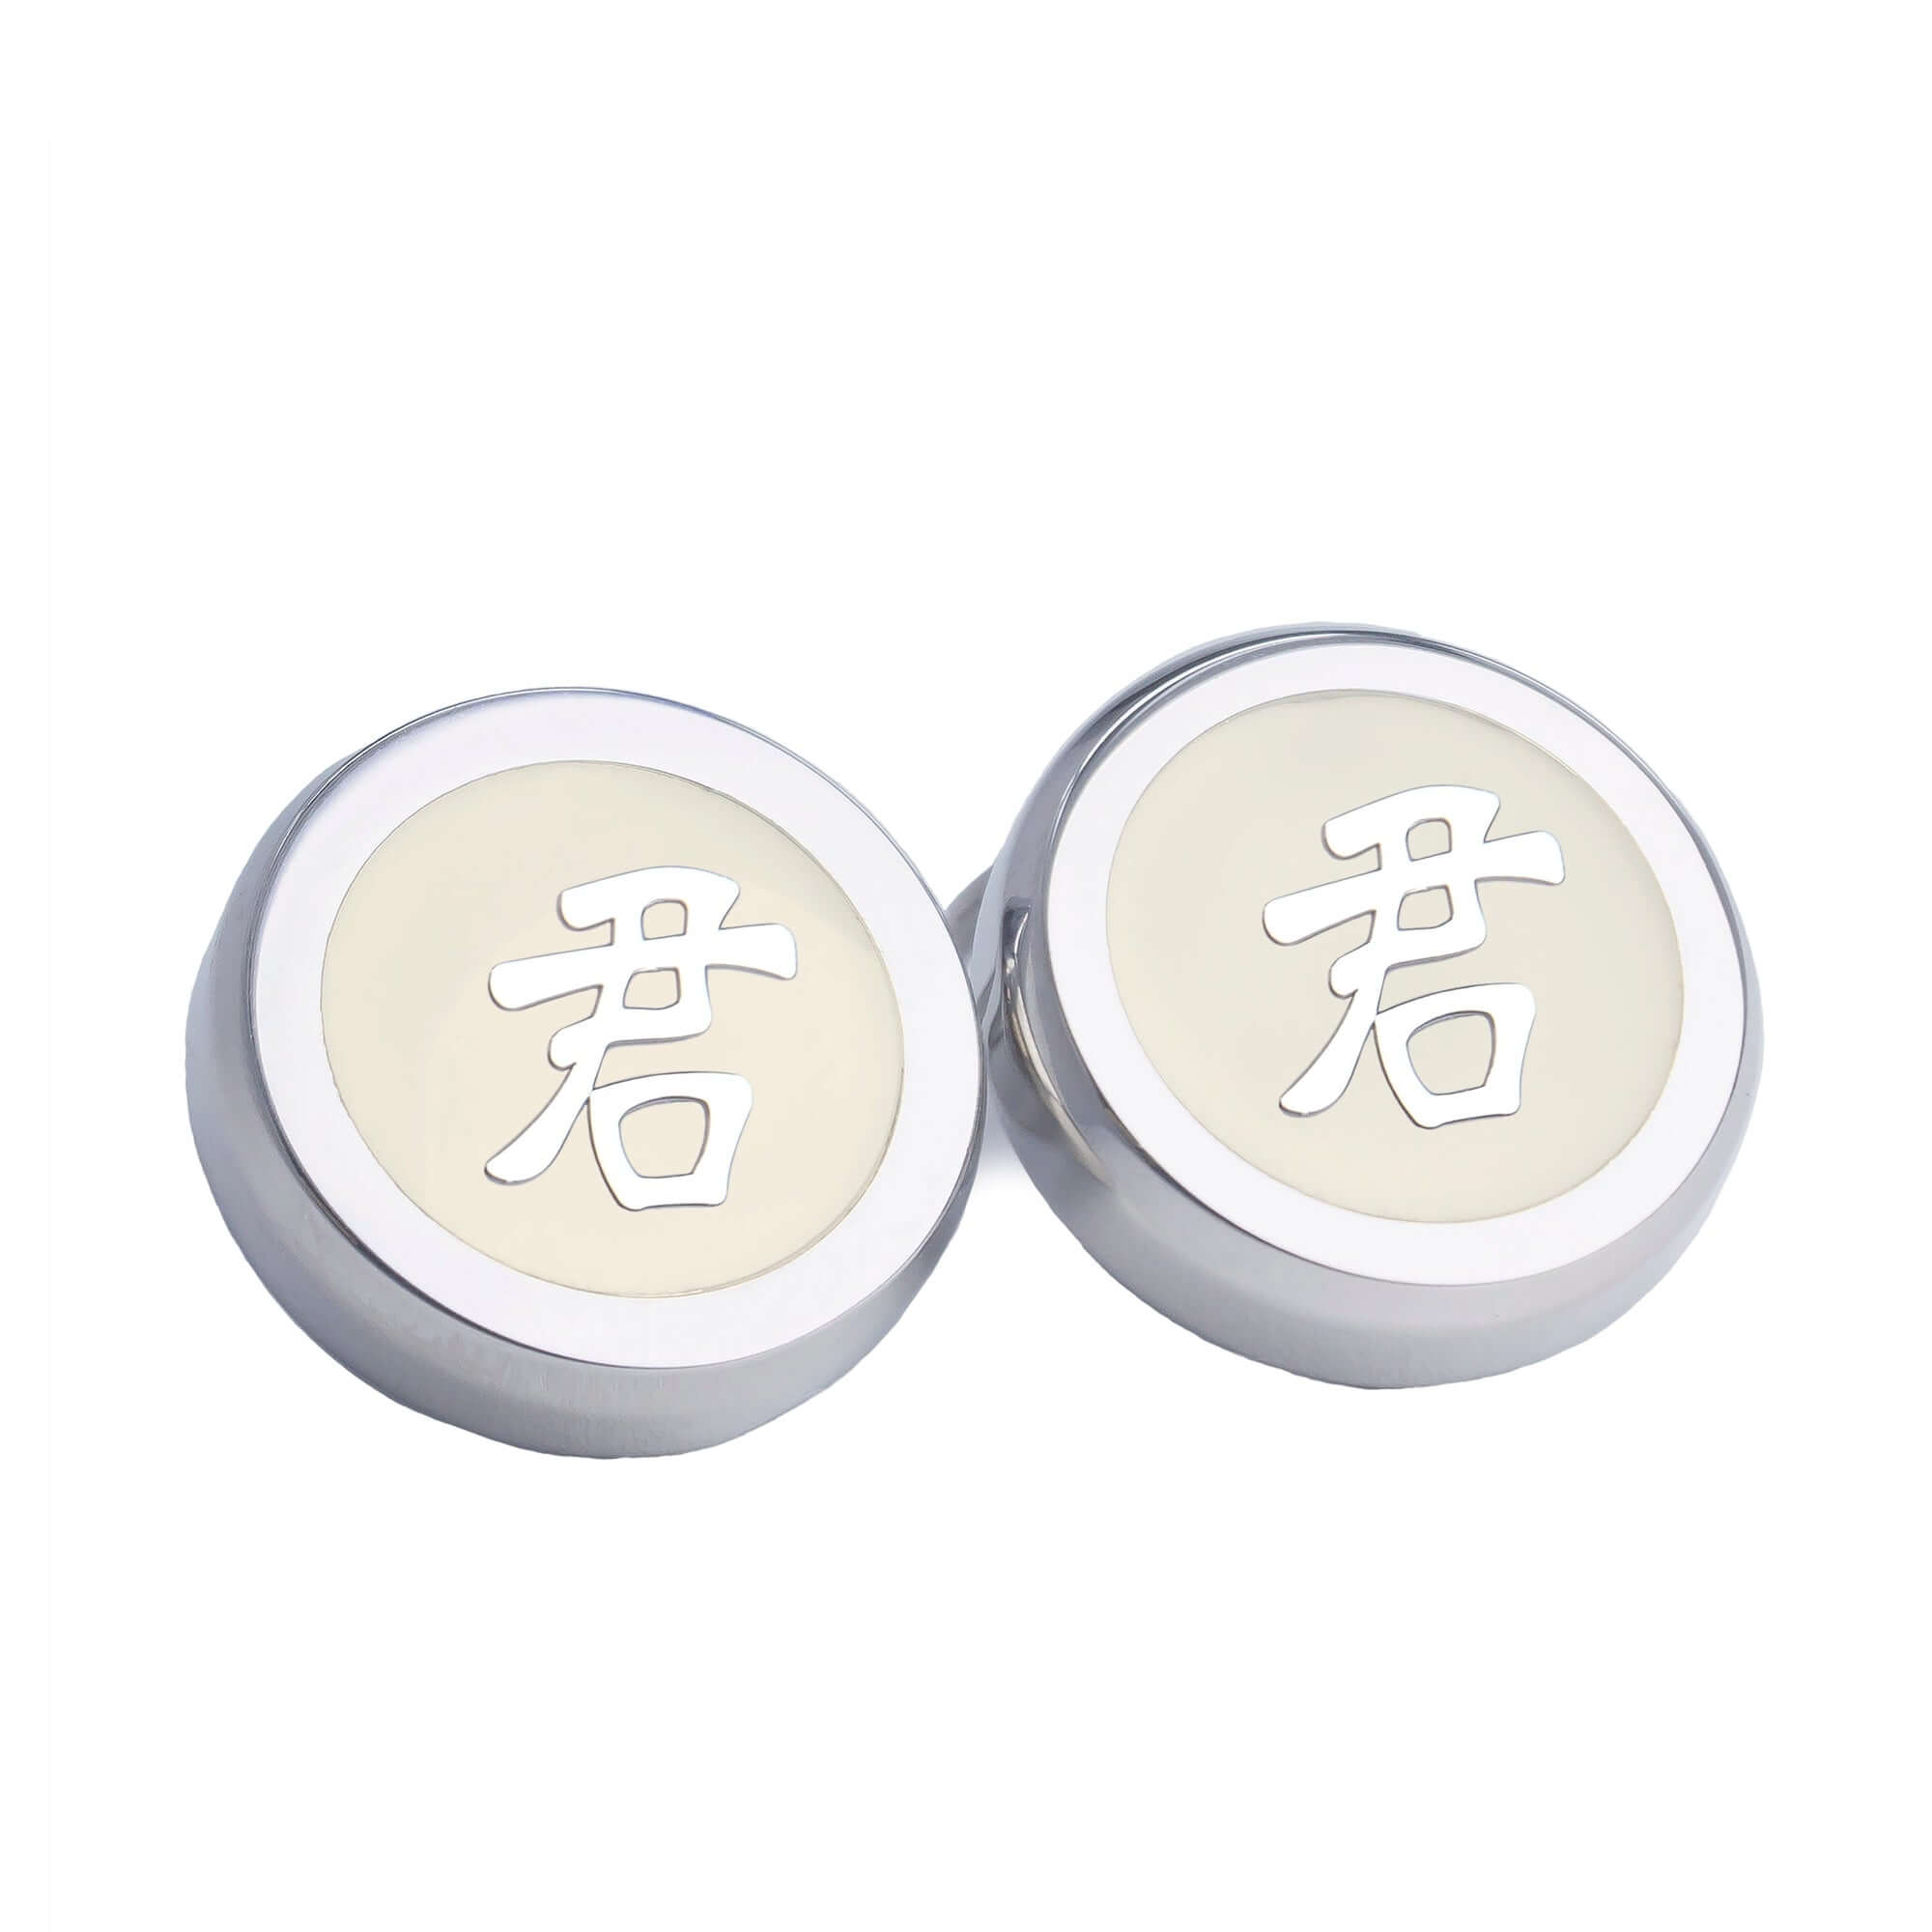 Chinese Character Silver Button Covers-Button Covers-A.Azthom-君 Jun-Cufflinks.com.sg